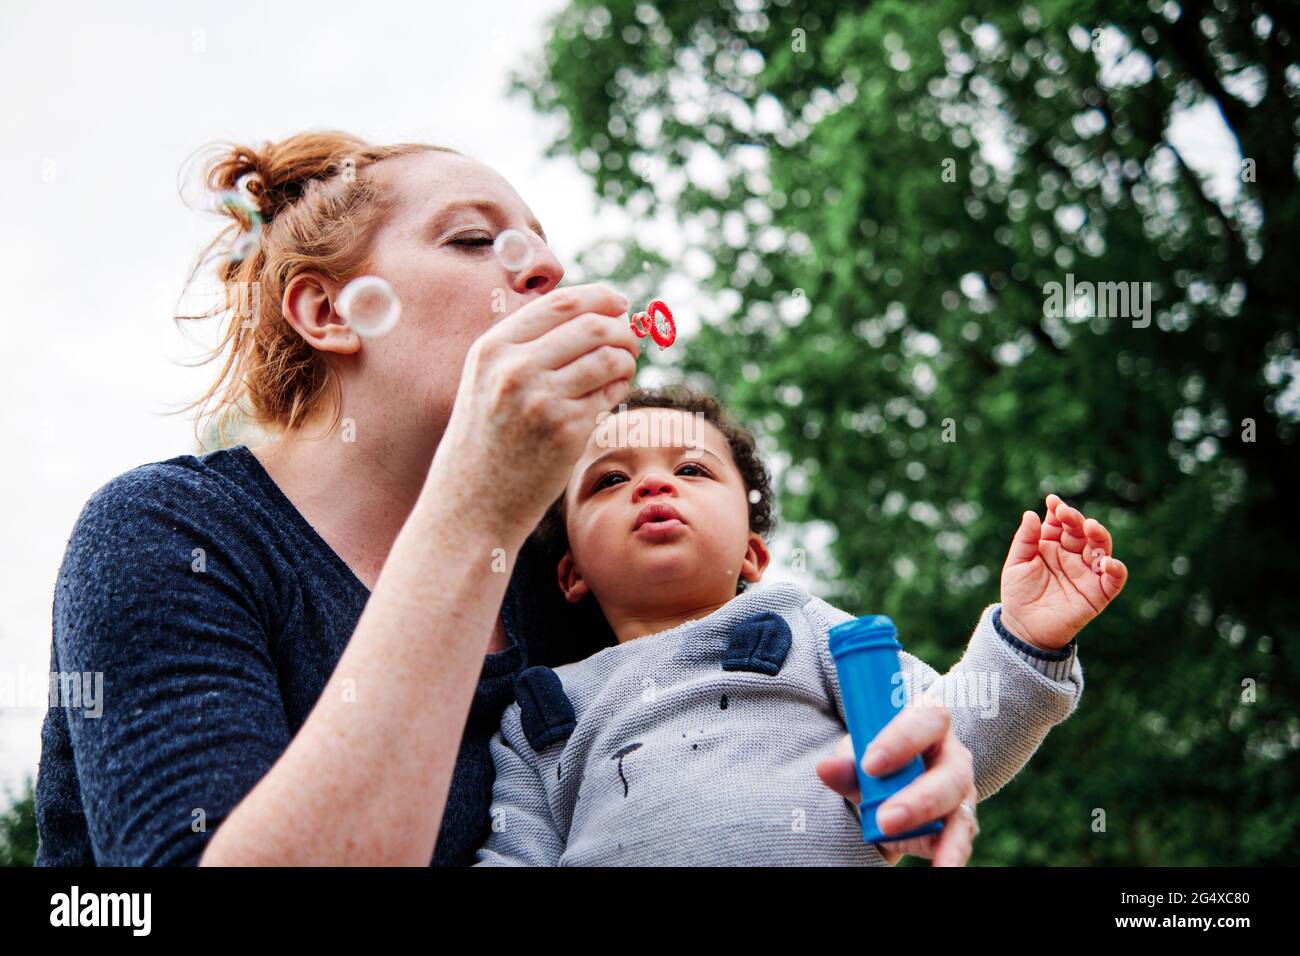 Mother Blowing Bubbles With Son At Park Stock Photo Alamy